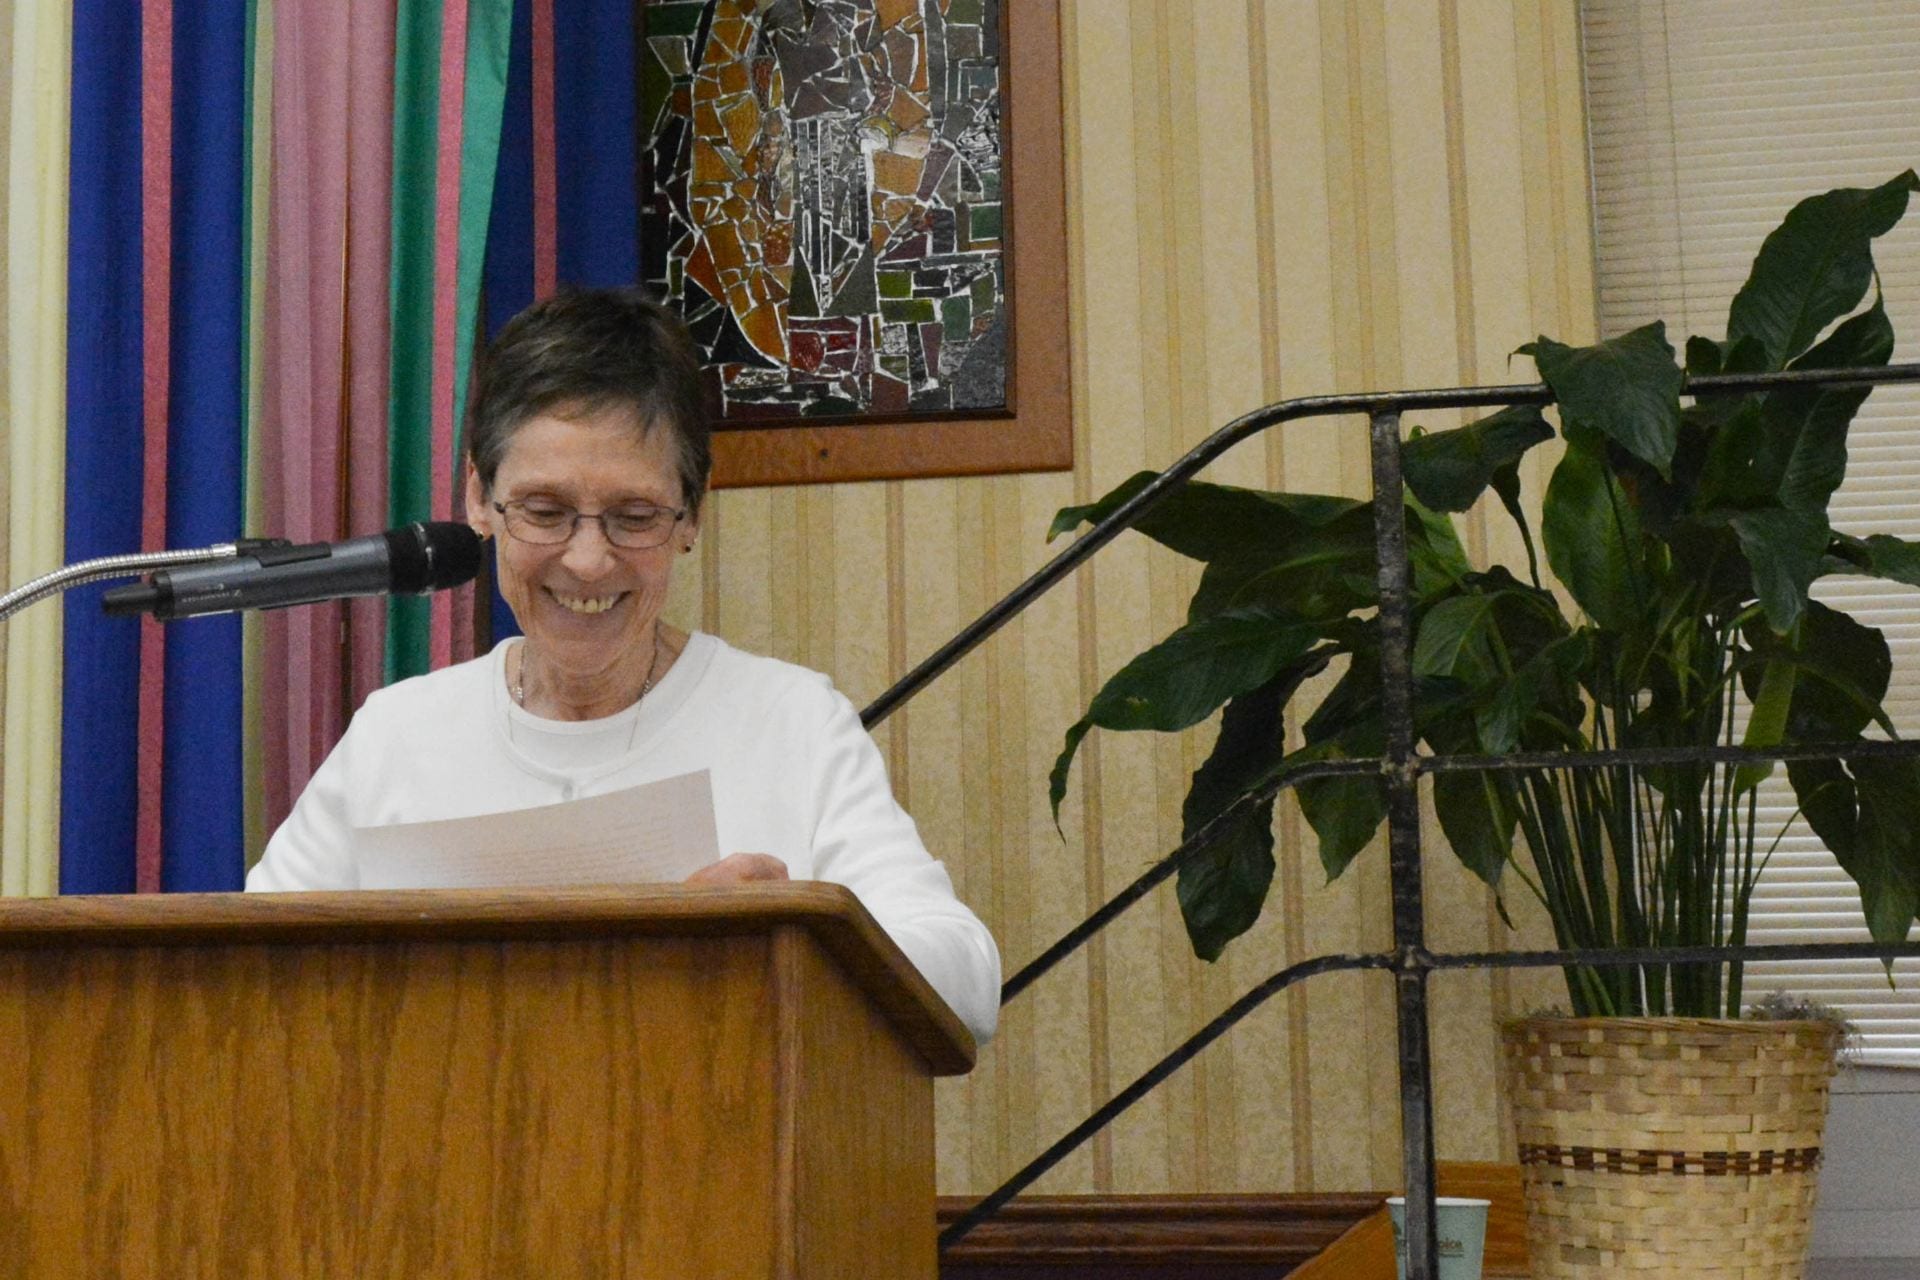 Sister Sharon Costello addresses members of the congregation during their five-year Chapter gathering this past summer.